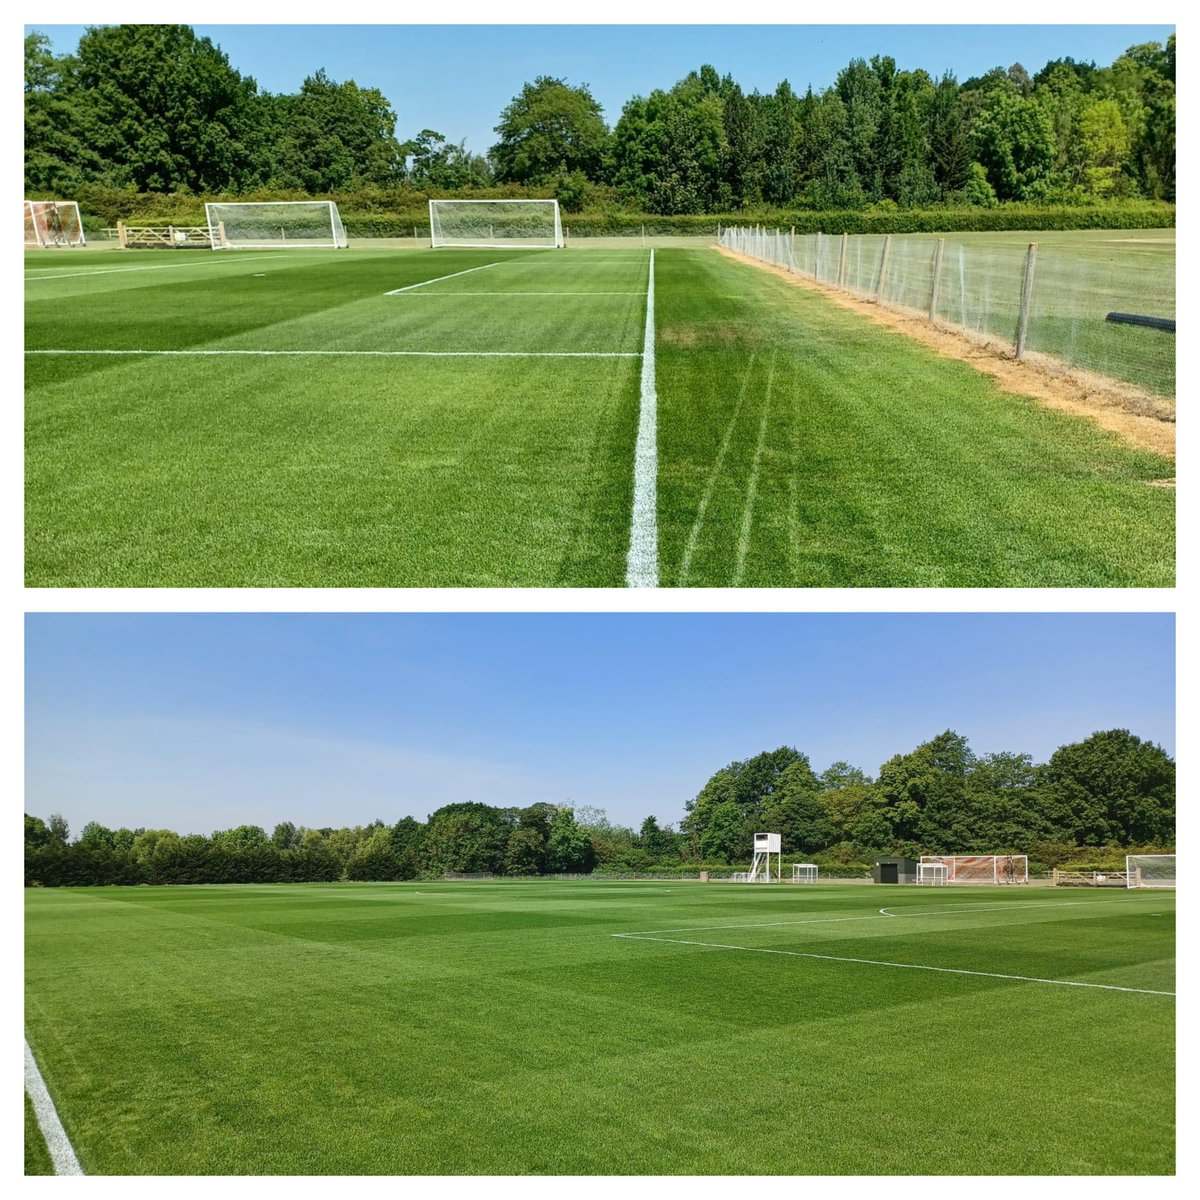 We were recently at the @Boro training ground to mark out their pitches, giving them a fresh look for the season ahead! Whilst we were in the area, we also ran a demonstration for a local business to show them how our #GPSRobots operate. T: 0800 138 7222 #TinyMobileRobotsUK